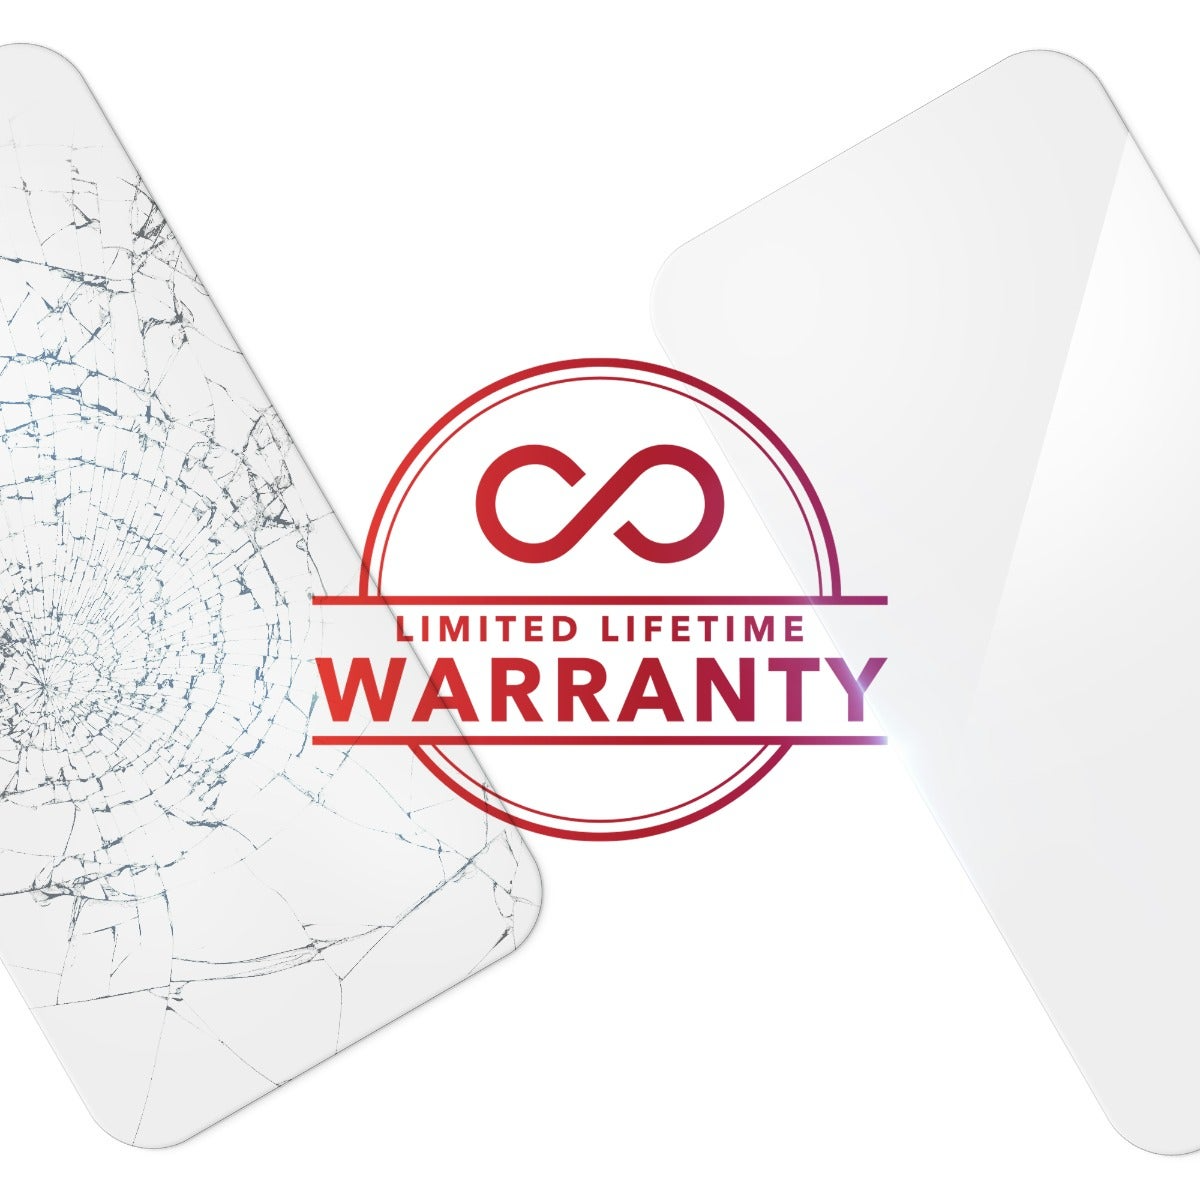 Limited Lifetime Warranty || If your screen protector ever gets worn or damaged, we will replace it for as long as you own your device.